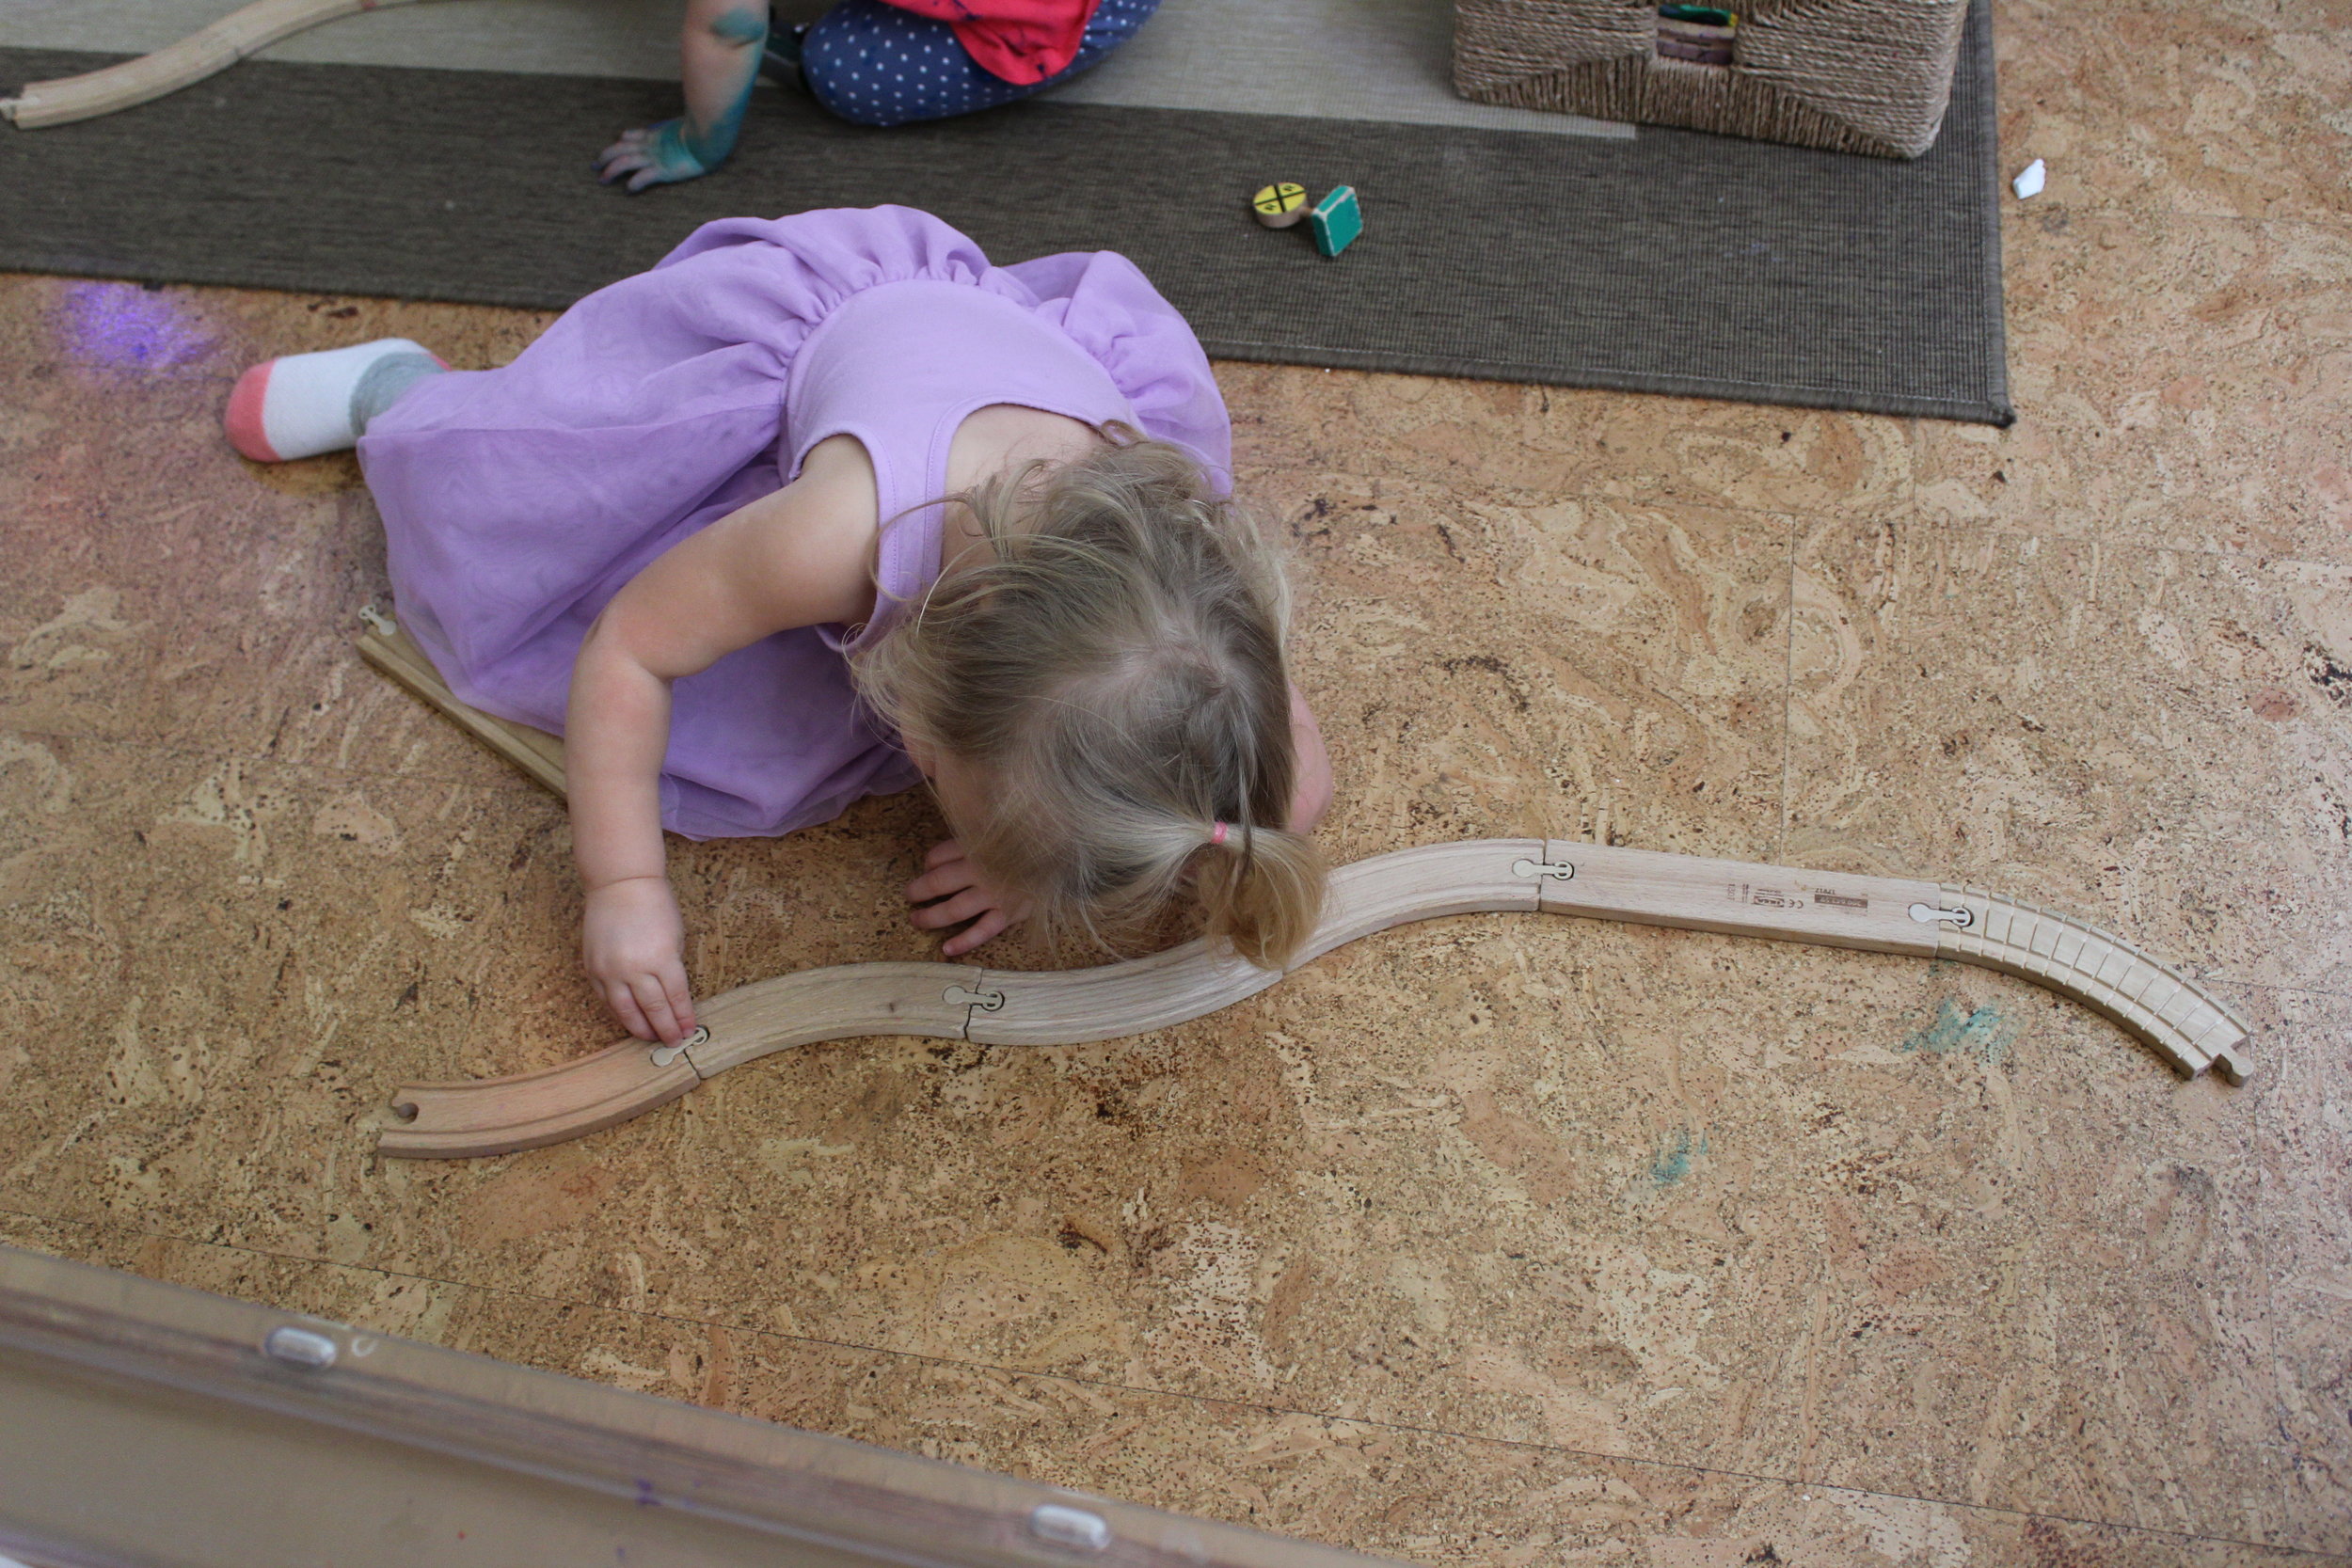  Train tracks are not only fun but developmentally appropriate for young toddlers.&nbsp; They are tools that help facilitate optimum child growth and development.&nbsp;&nbsp;&nbsp; Each piece stimulates Madeline imagination and creativity.&nbsp; It a